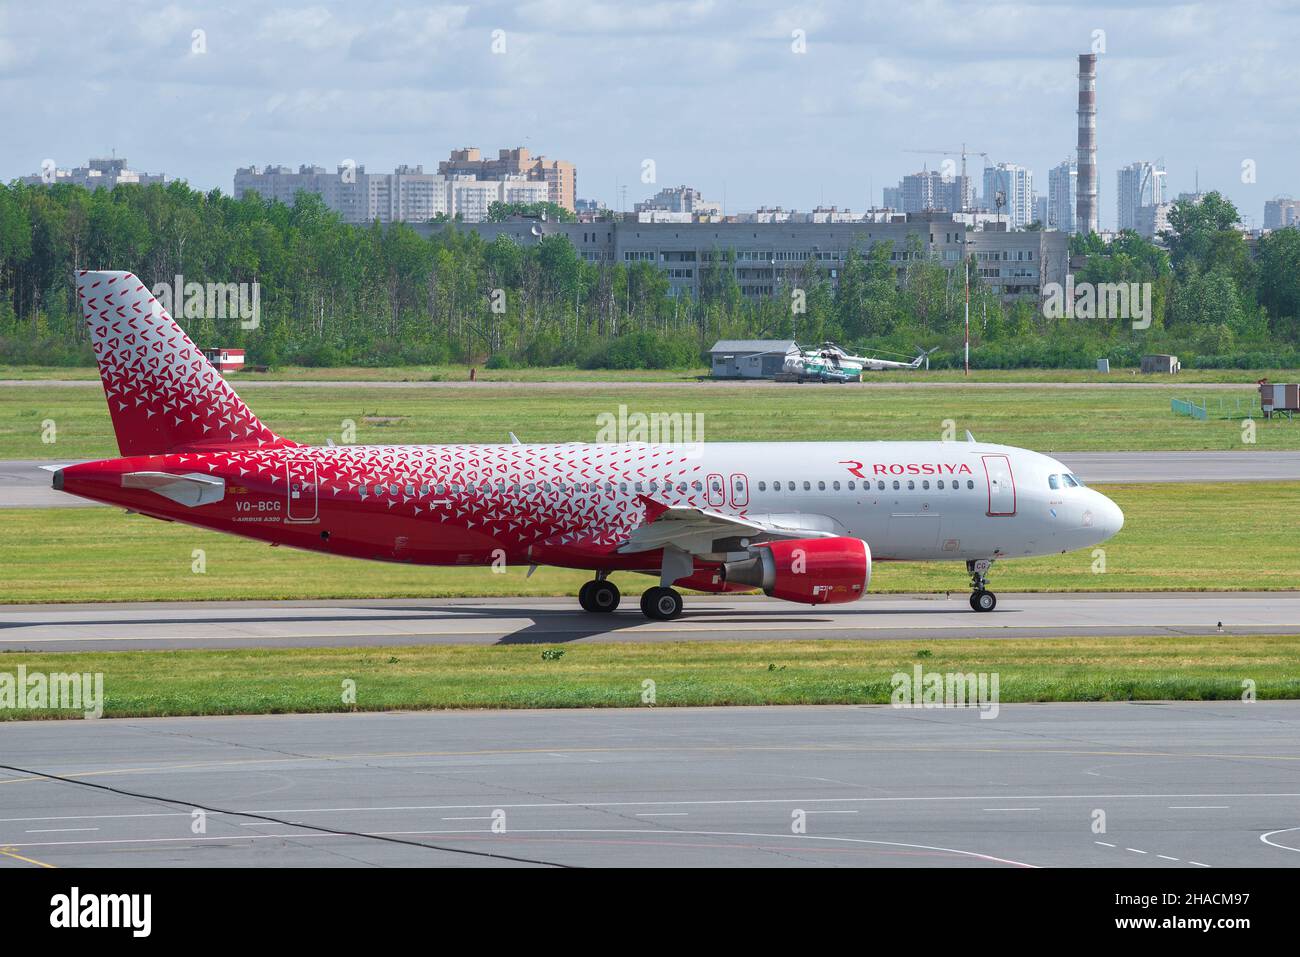 SAINT PETERSBURG, RUSSIA - JUNE 20, 2018: Airbus A320-200 'Kursk' (VQ-BCG) of Rossiya Airlines after landing in Pulkovo airport on a sunny June day Stock Photo